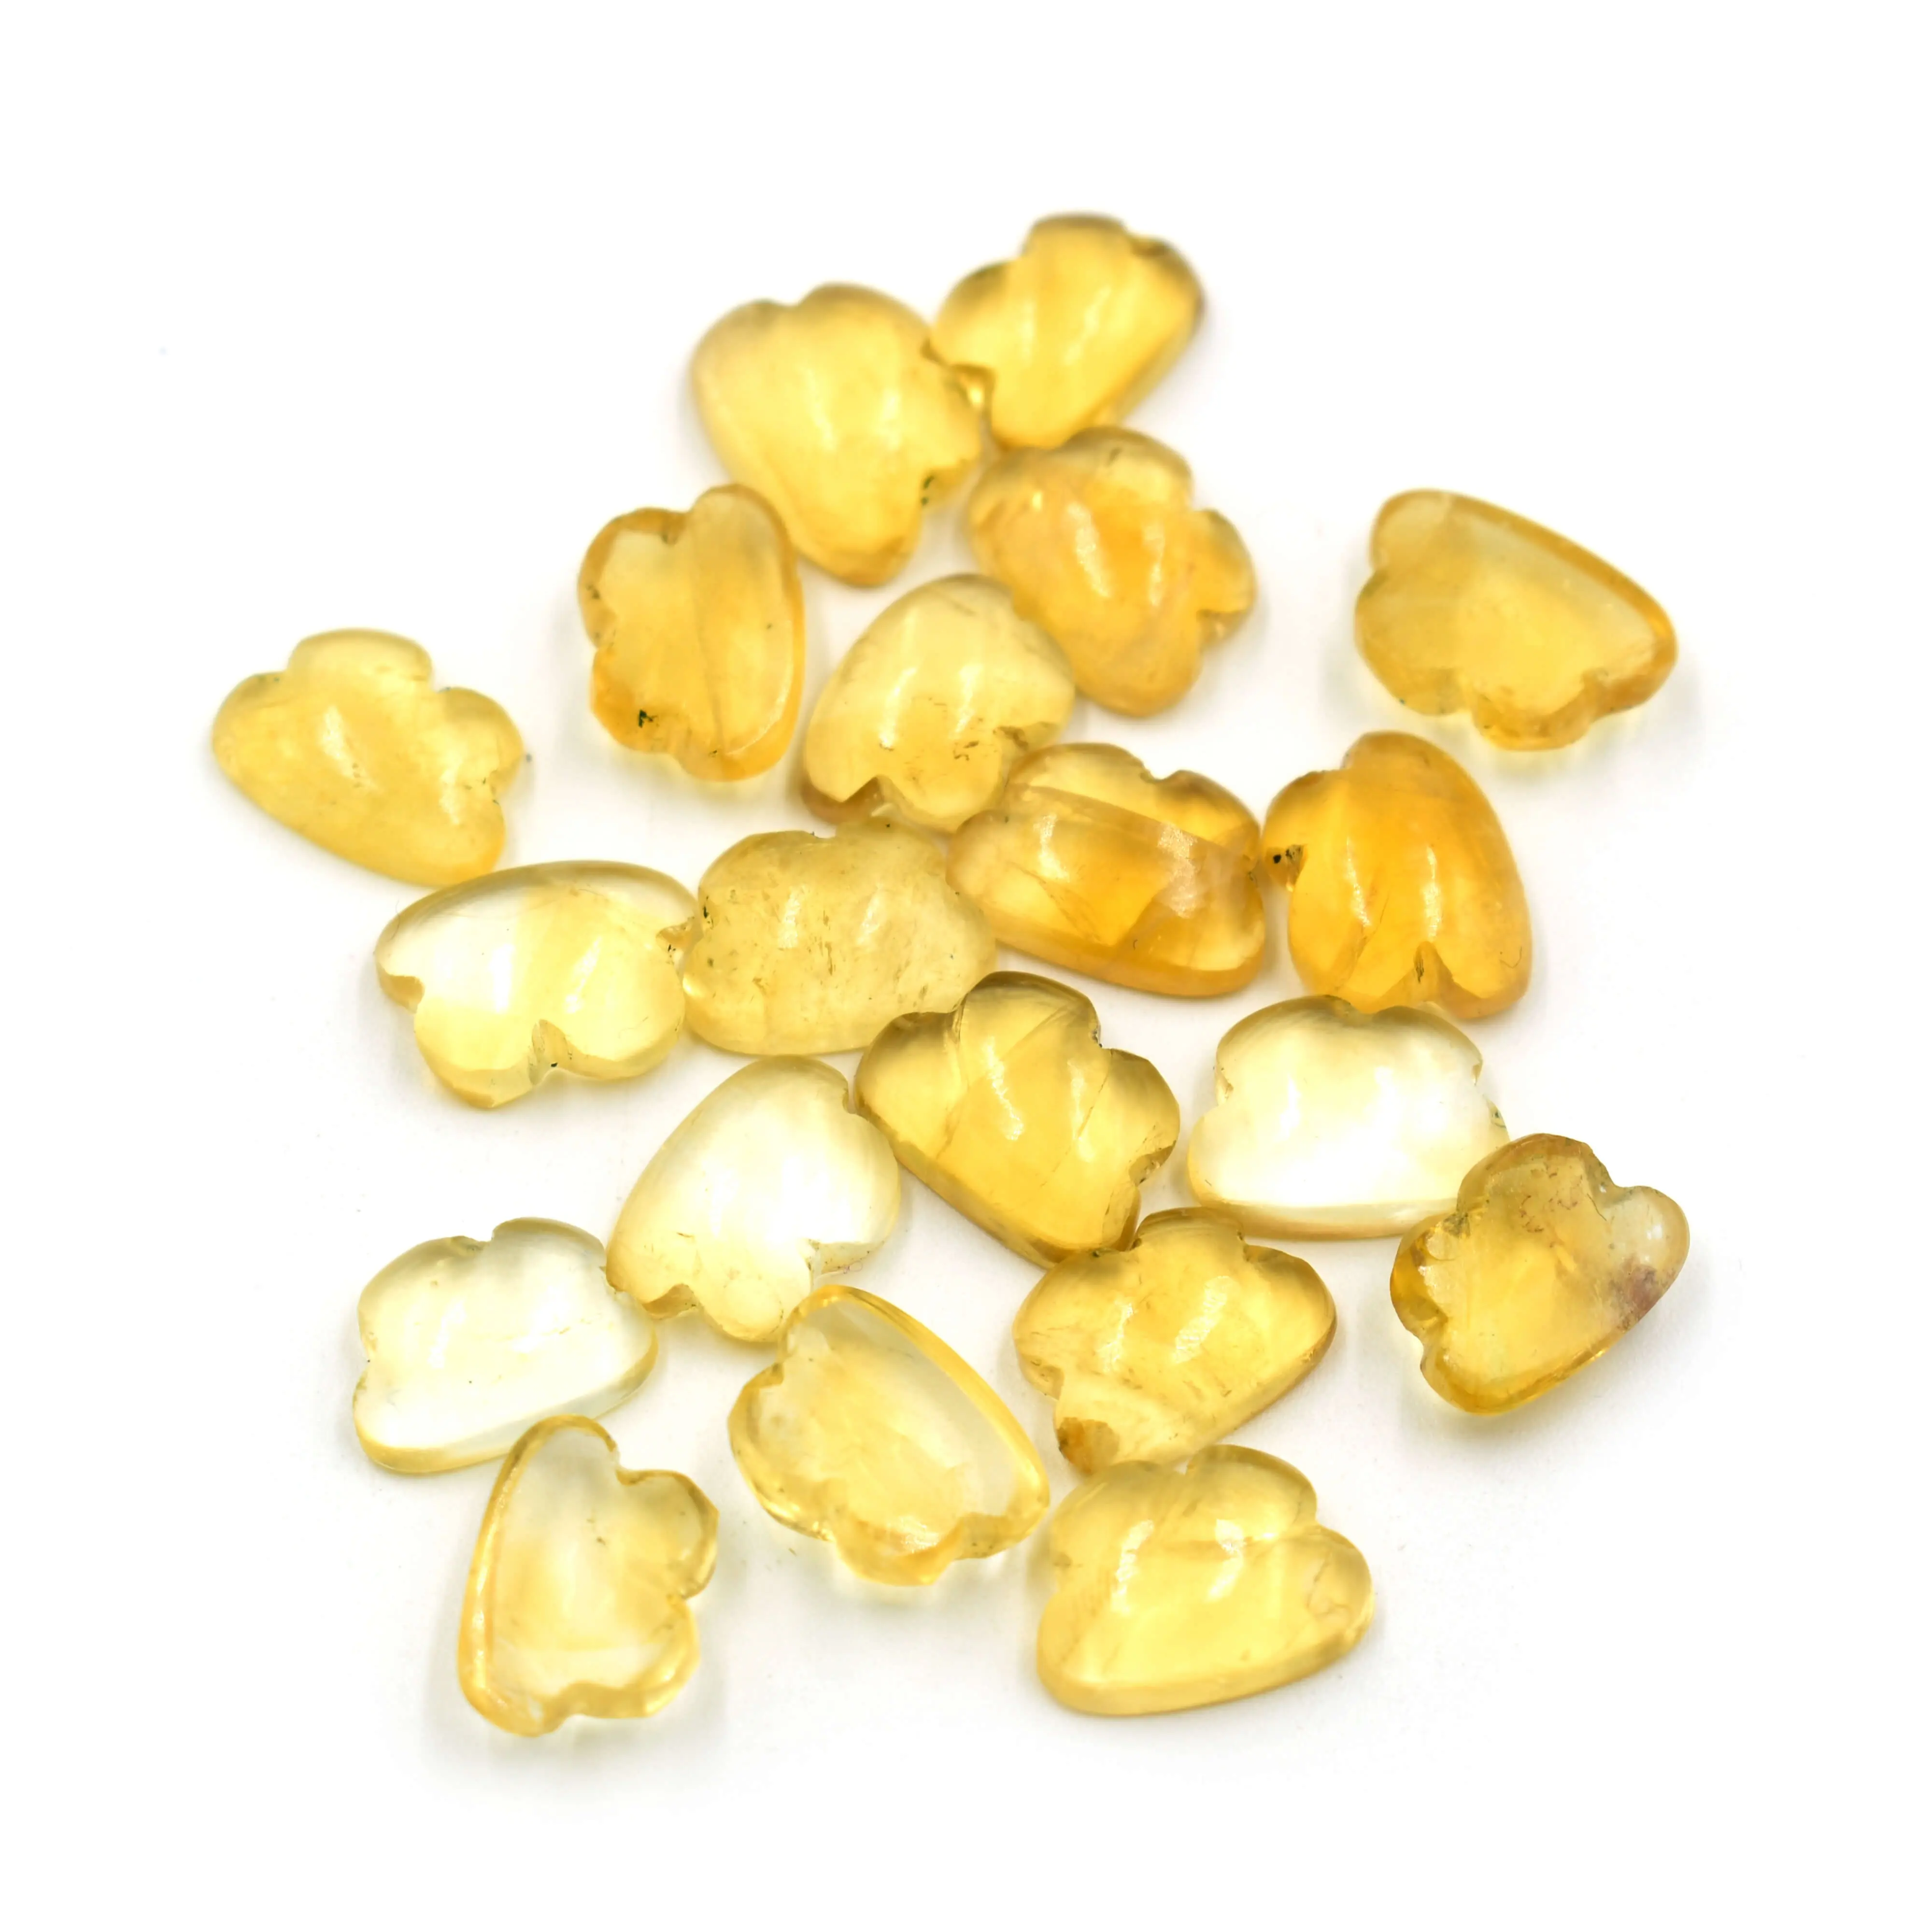 Yellow Color Citrine Cabochons Carved Cloud Shape Stone for Making Jewellery, Flat Back Cabochons Stone